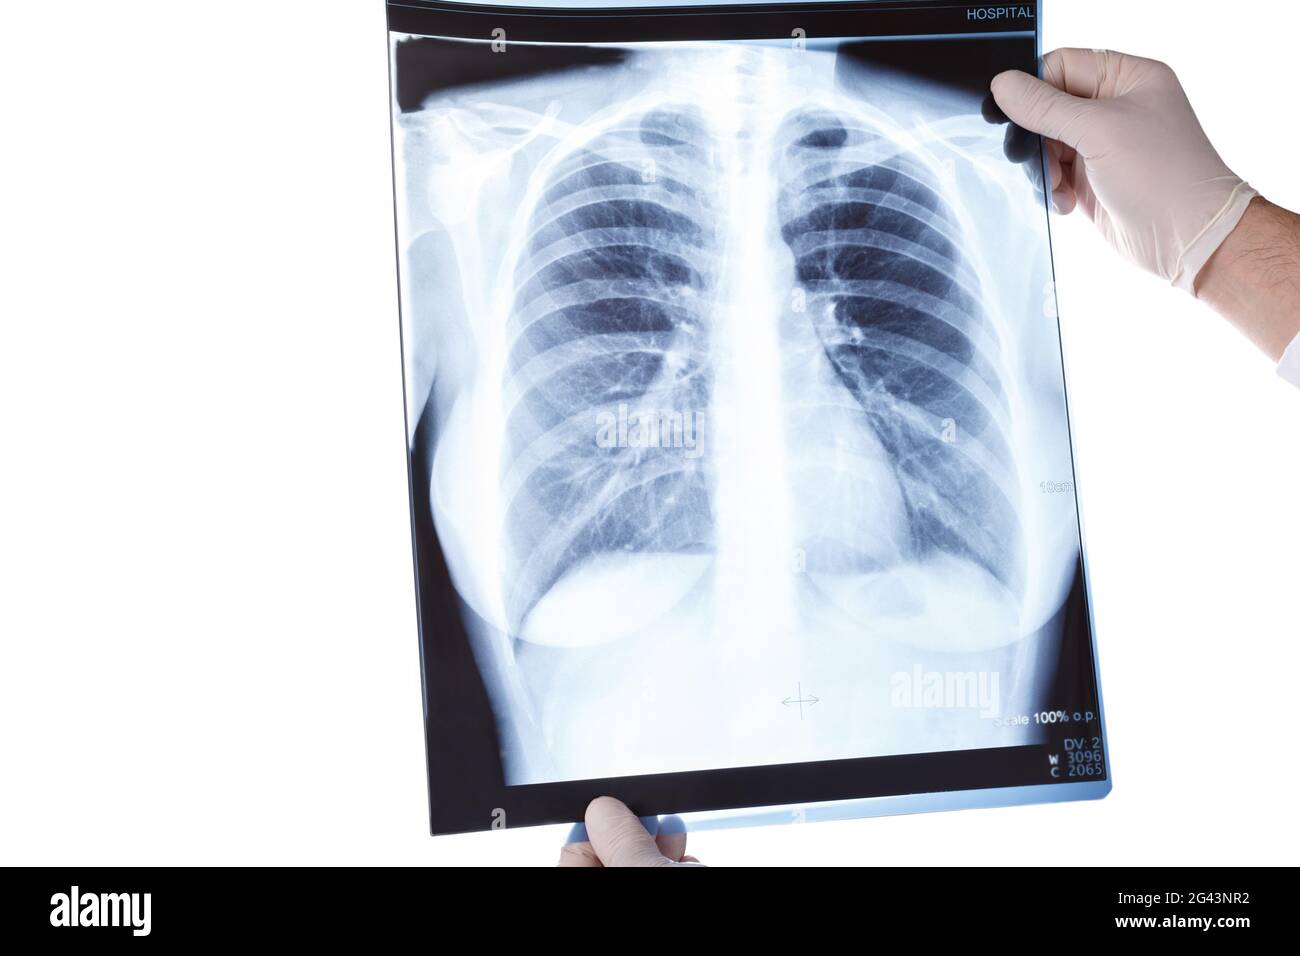 Doctor looking at chest x-ray Stock Photo